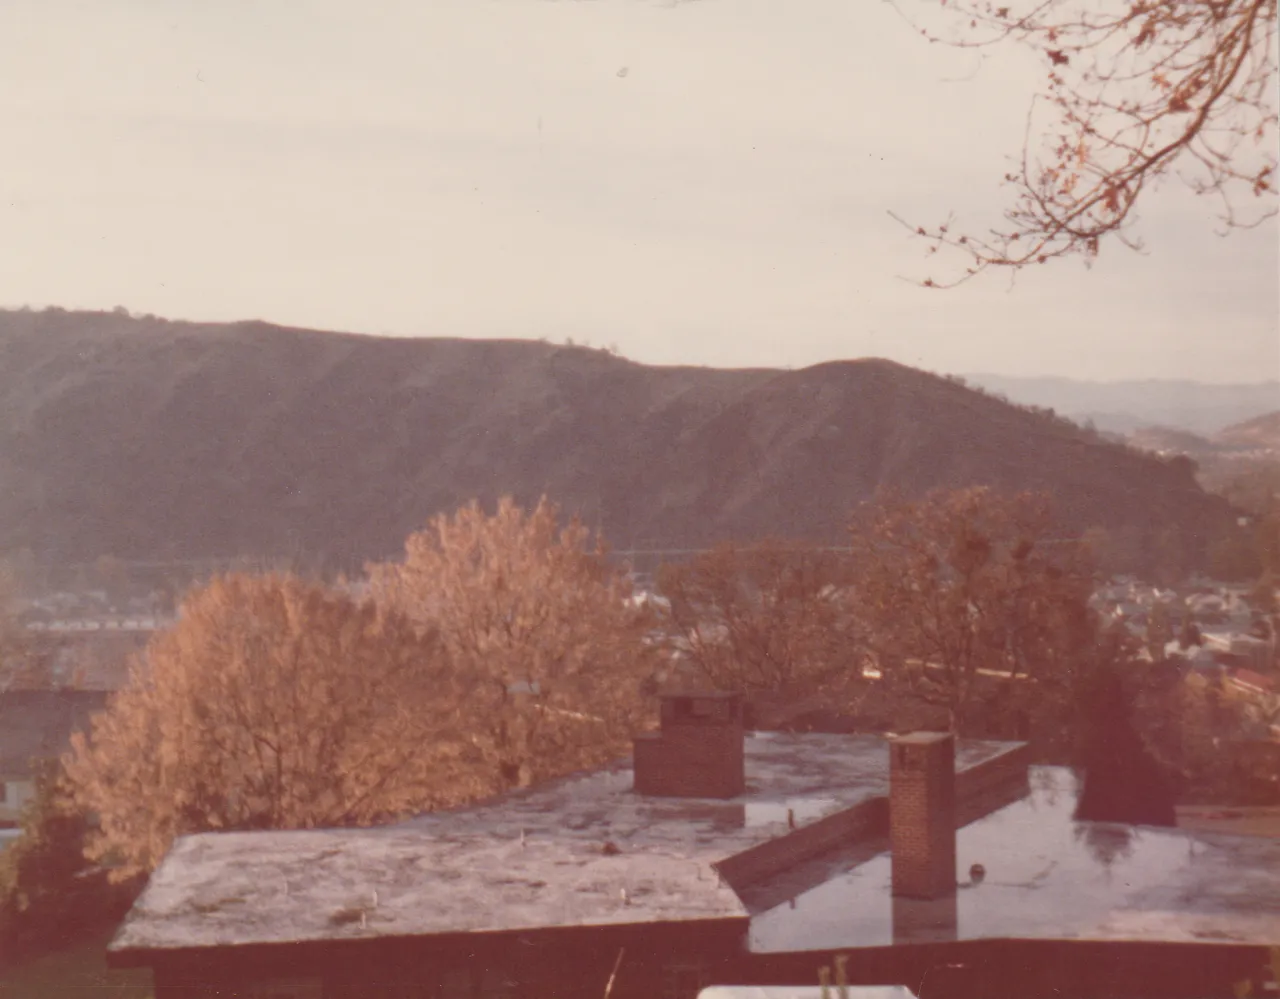 1974-11-28 - Thursday - Thanksgiving, outside view of houses, trees, hill, 3pics-1.png